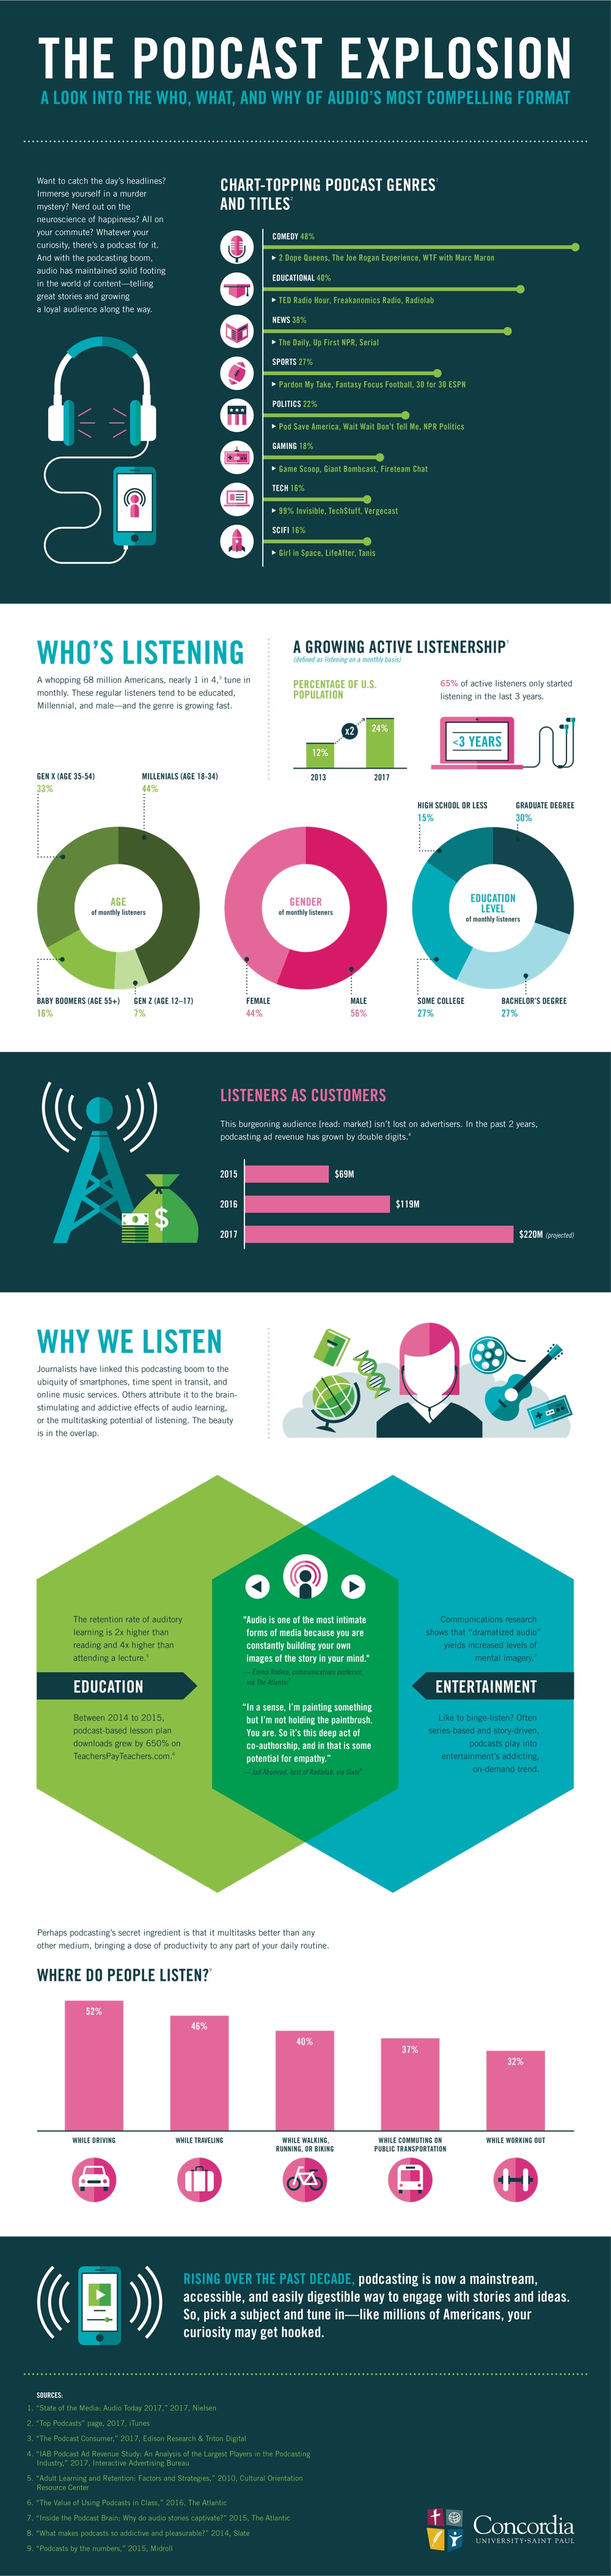 podcasting 2019 - infographic